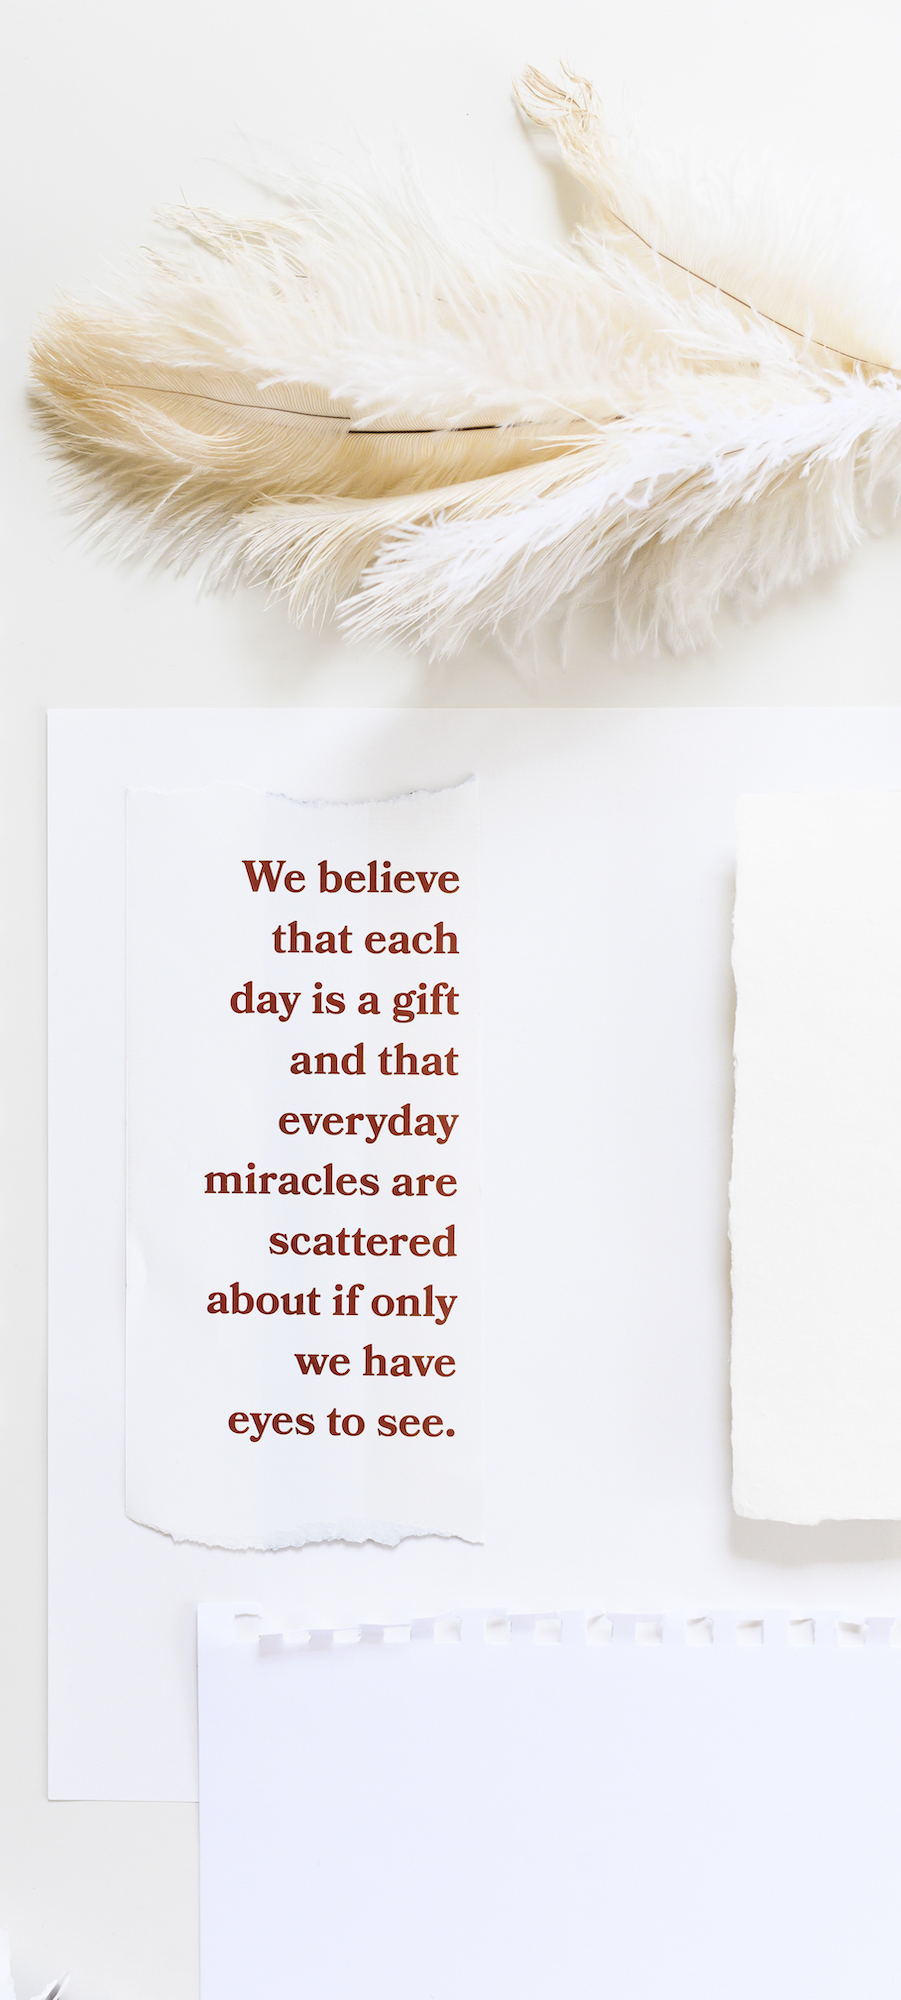 We believe that each day is a gift and that everyday miracles are scattered about if only we have eyes to see. Healthy boundary setting in Miramar, FL is done here with codependency treatment, healthy boundaries, anxiety treatment and divorce recovery in Miramar, FL.